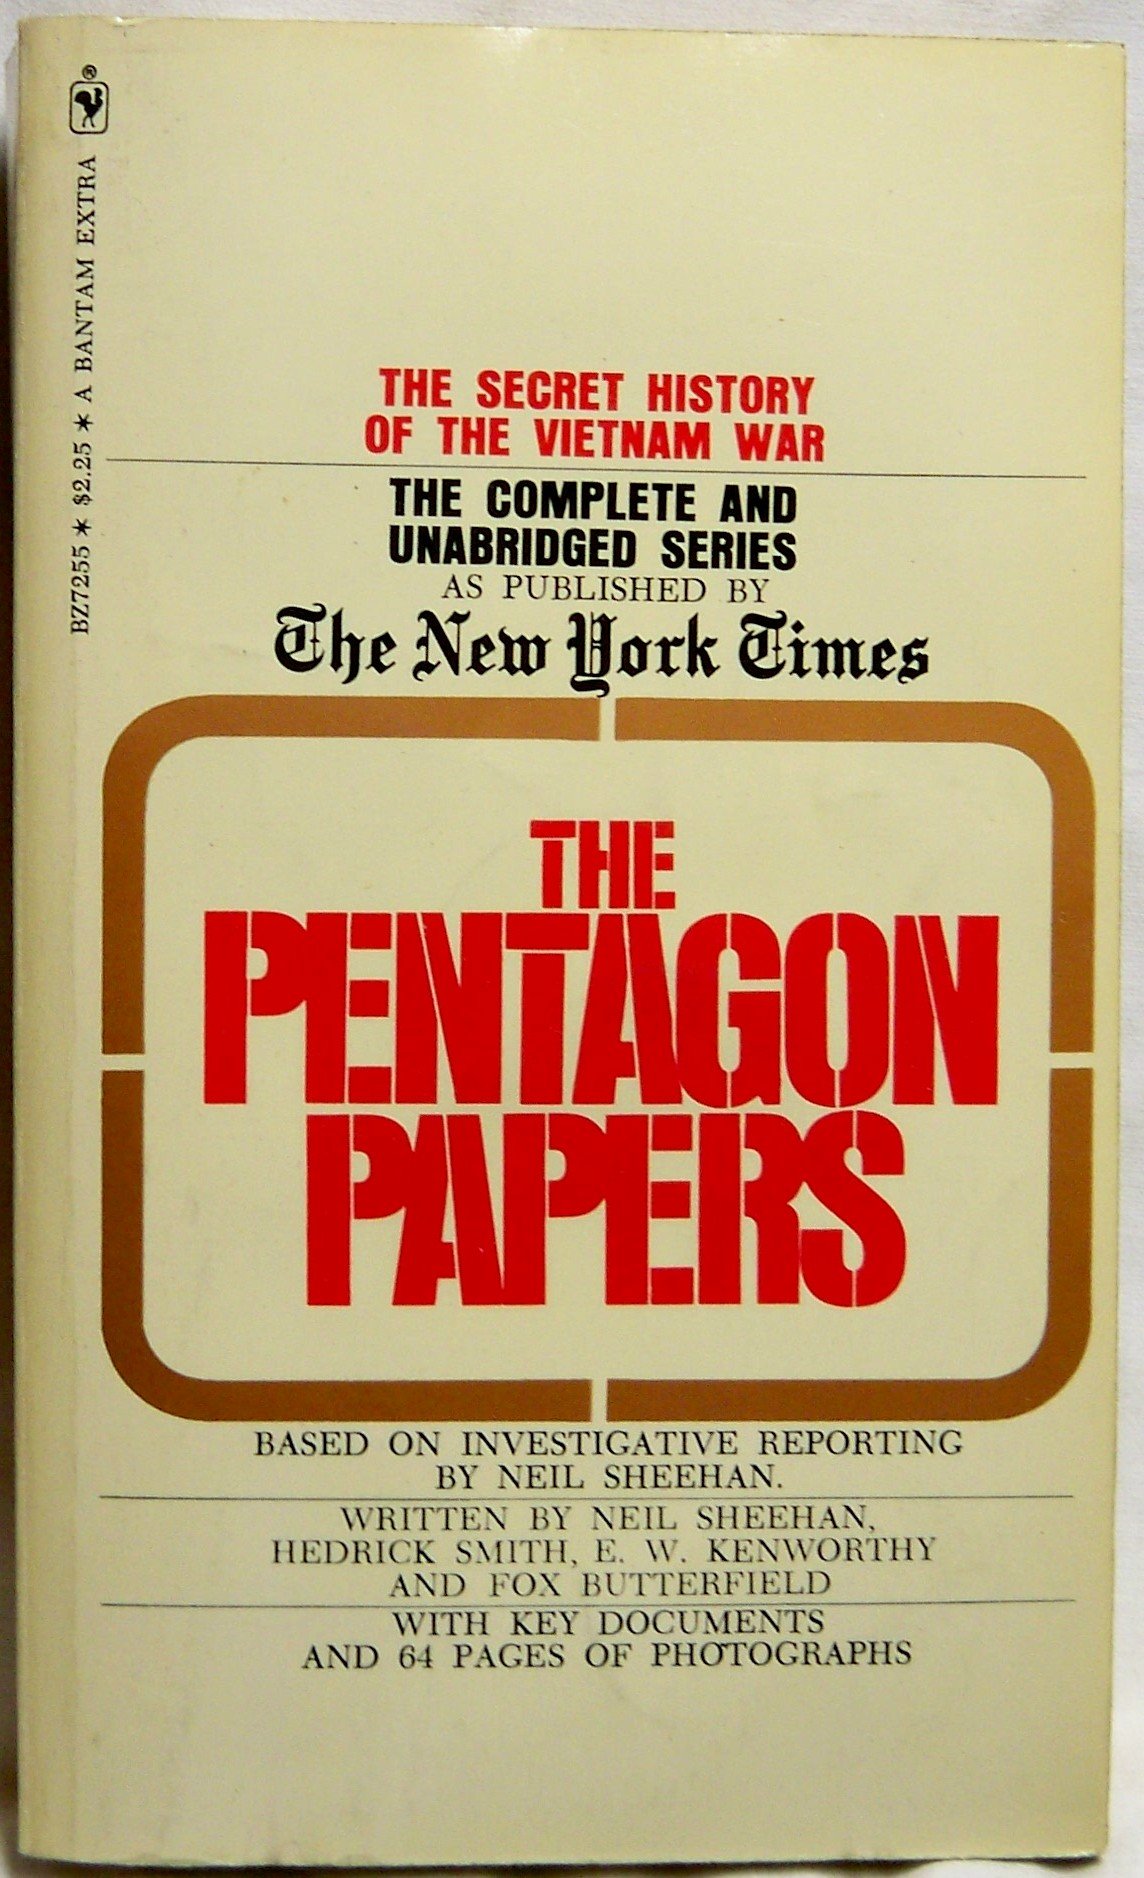 The Pentagon Papers: The Complete And Unabridged Series As Published By The New York Times